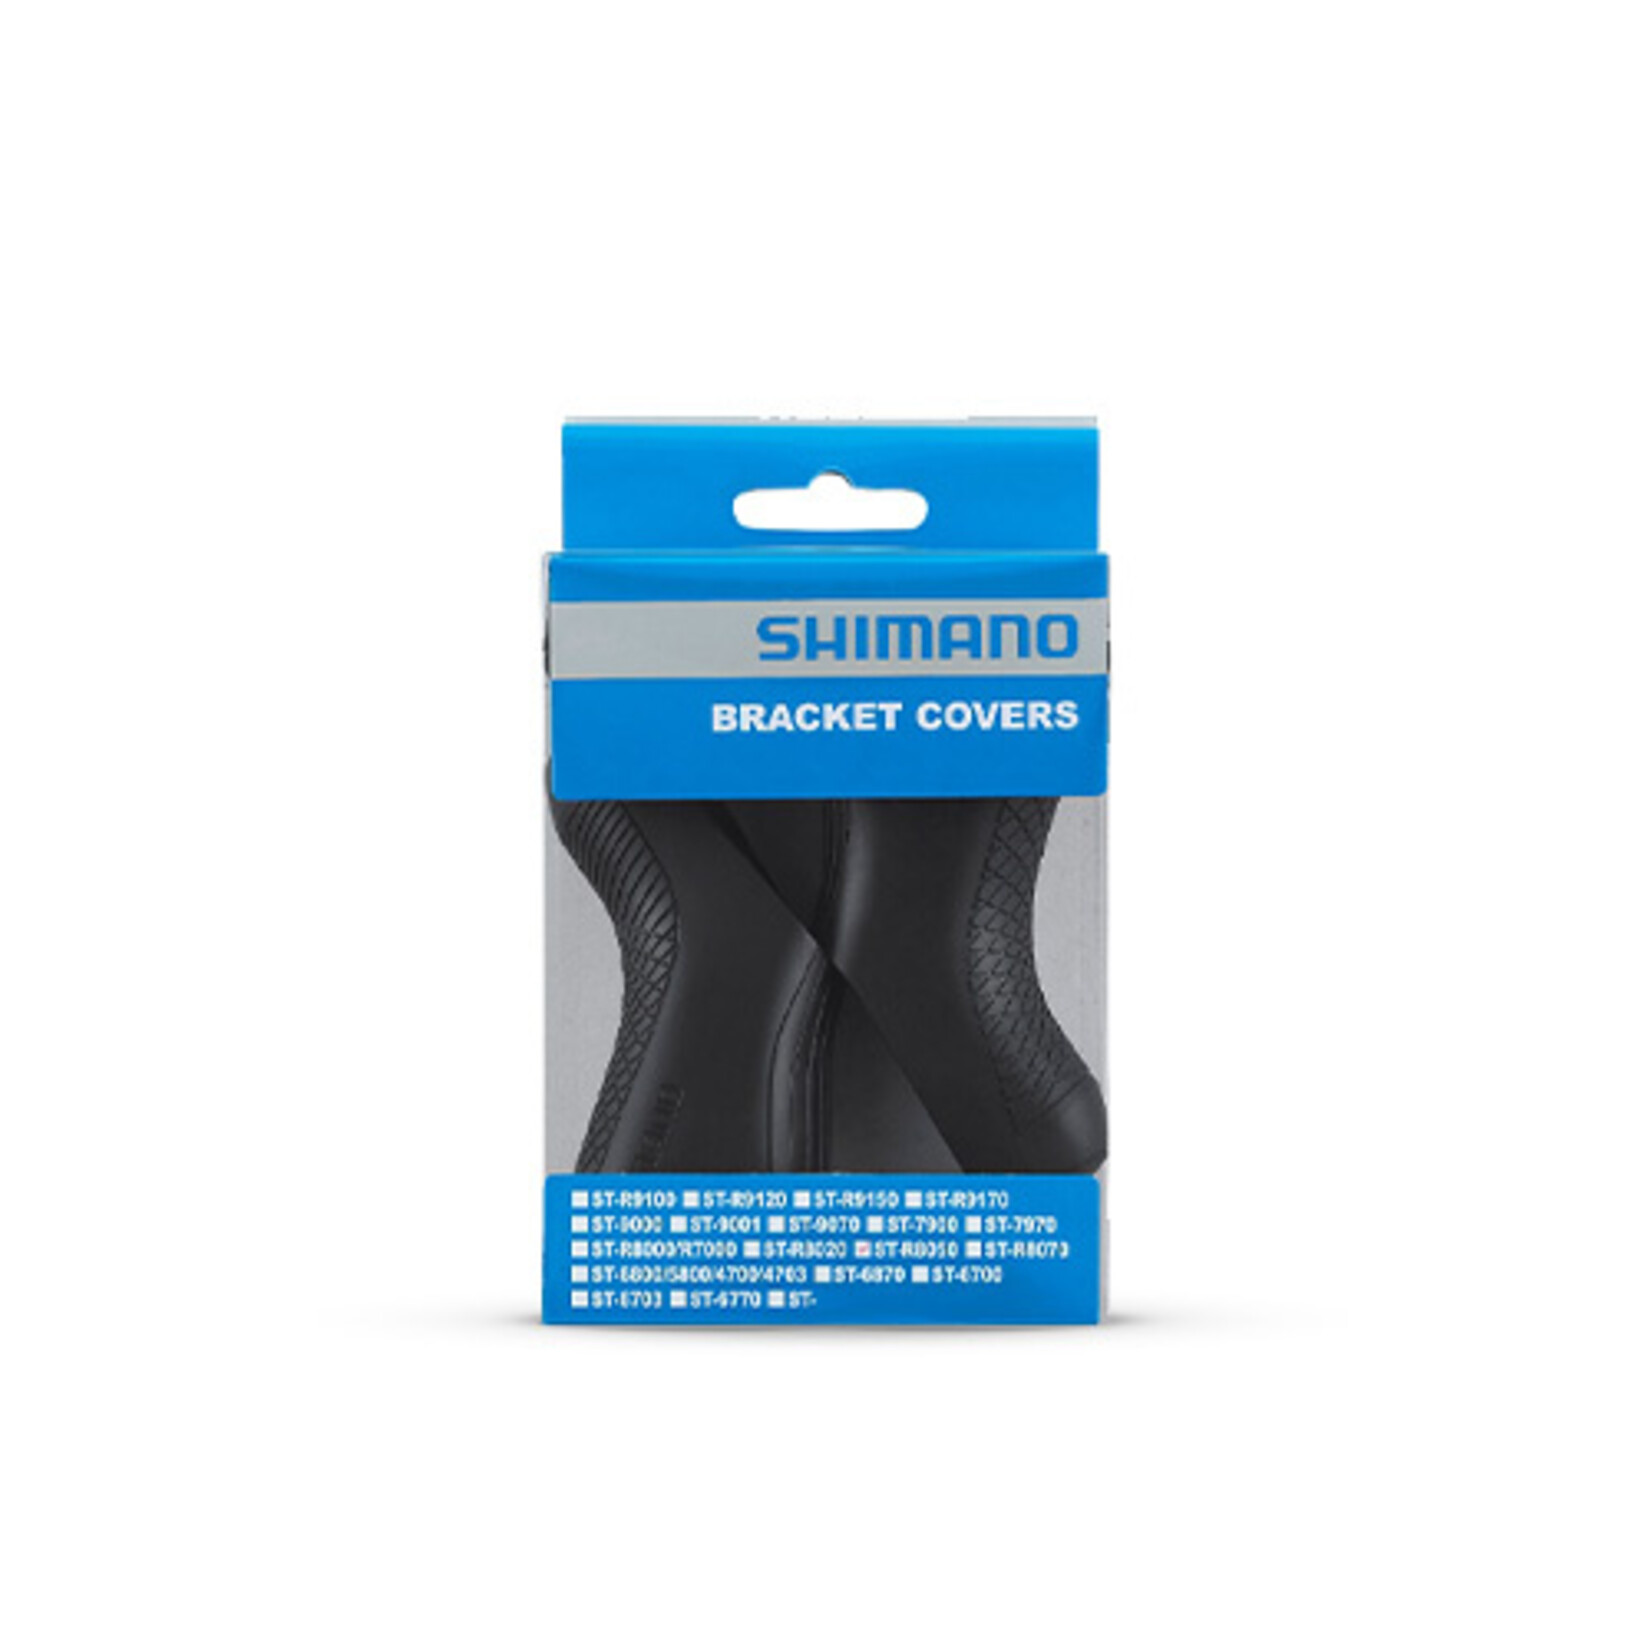 SHIMANO ST-8050 SHIFTER HOODS / COVERS